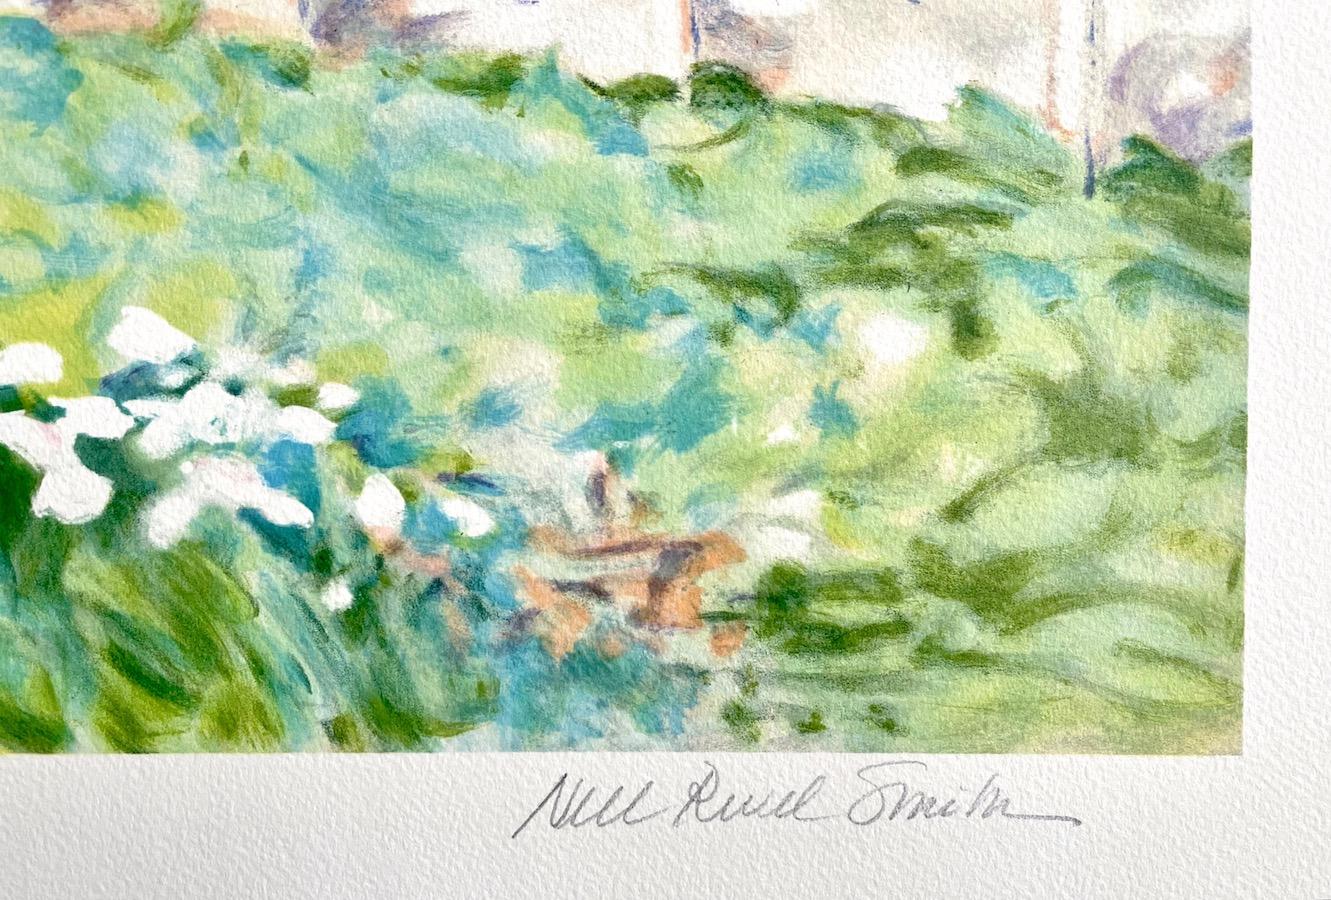 nell revel smith paintings for sale